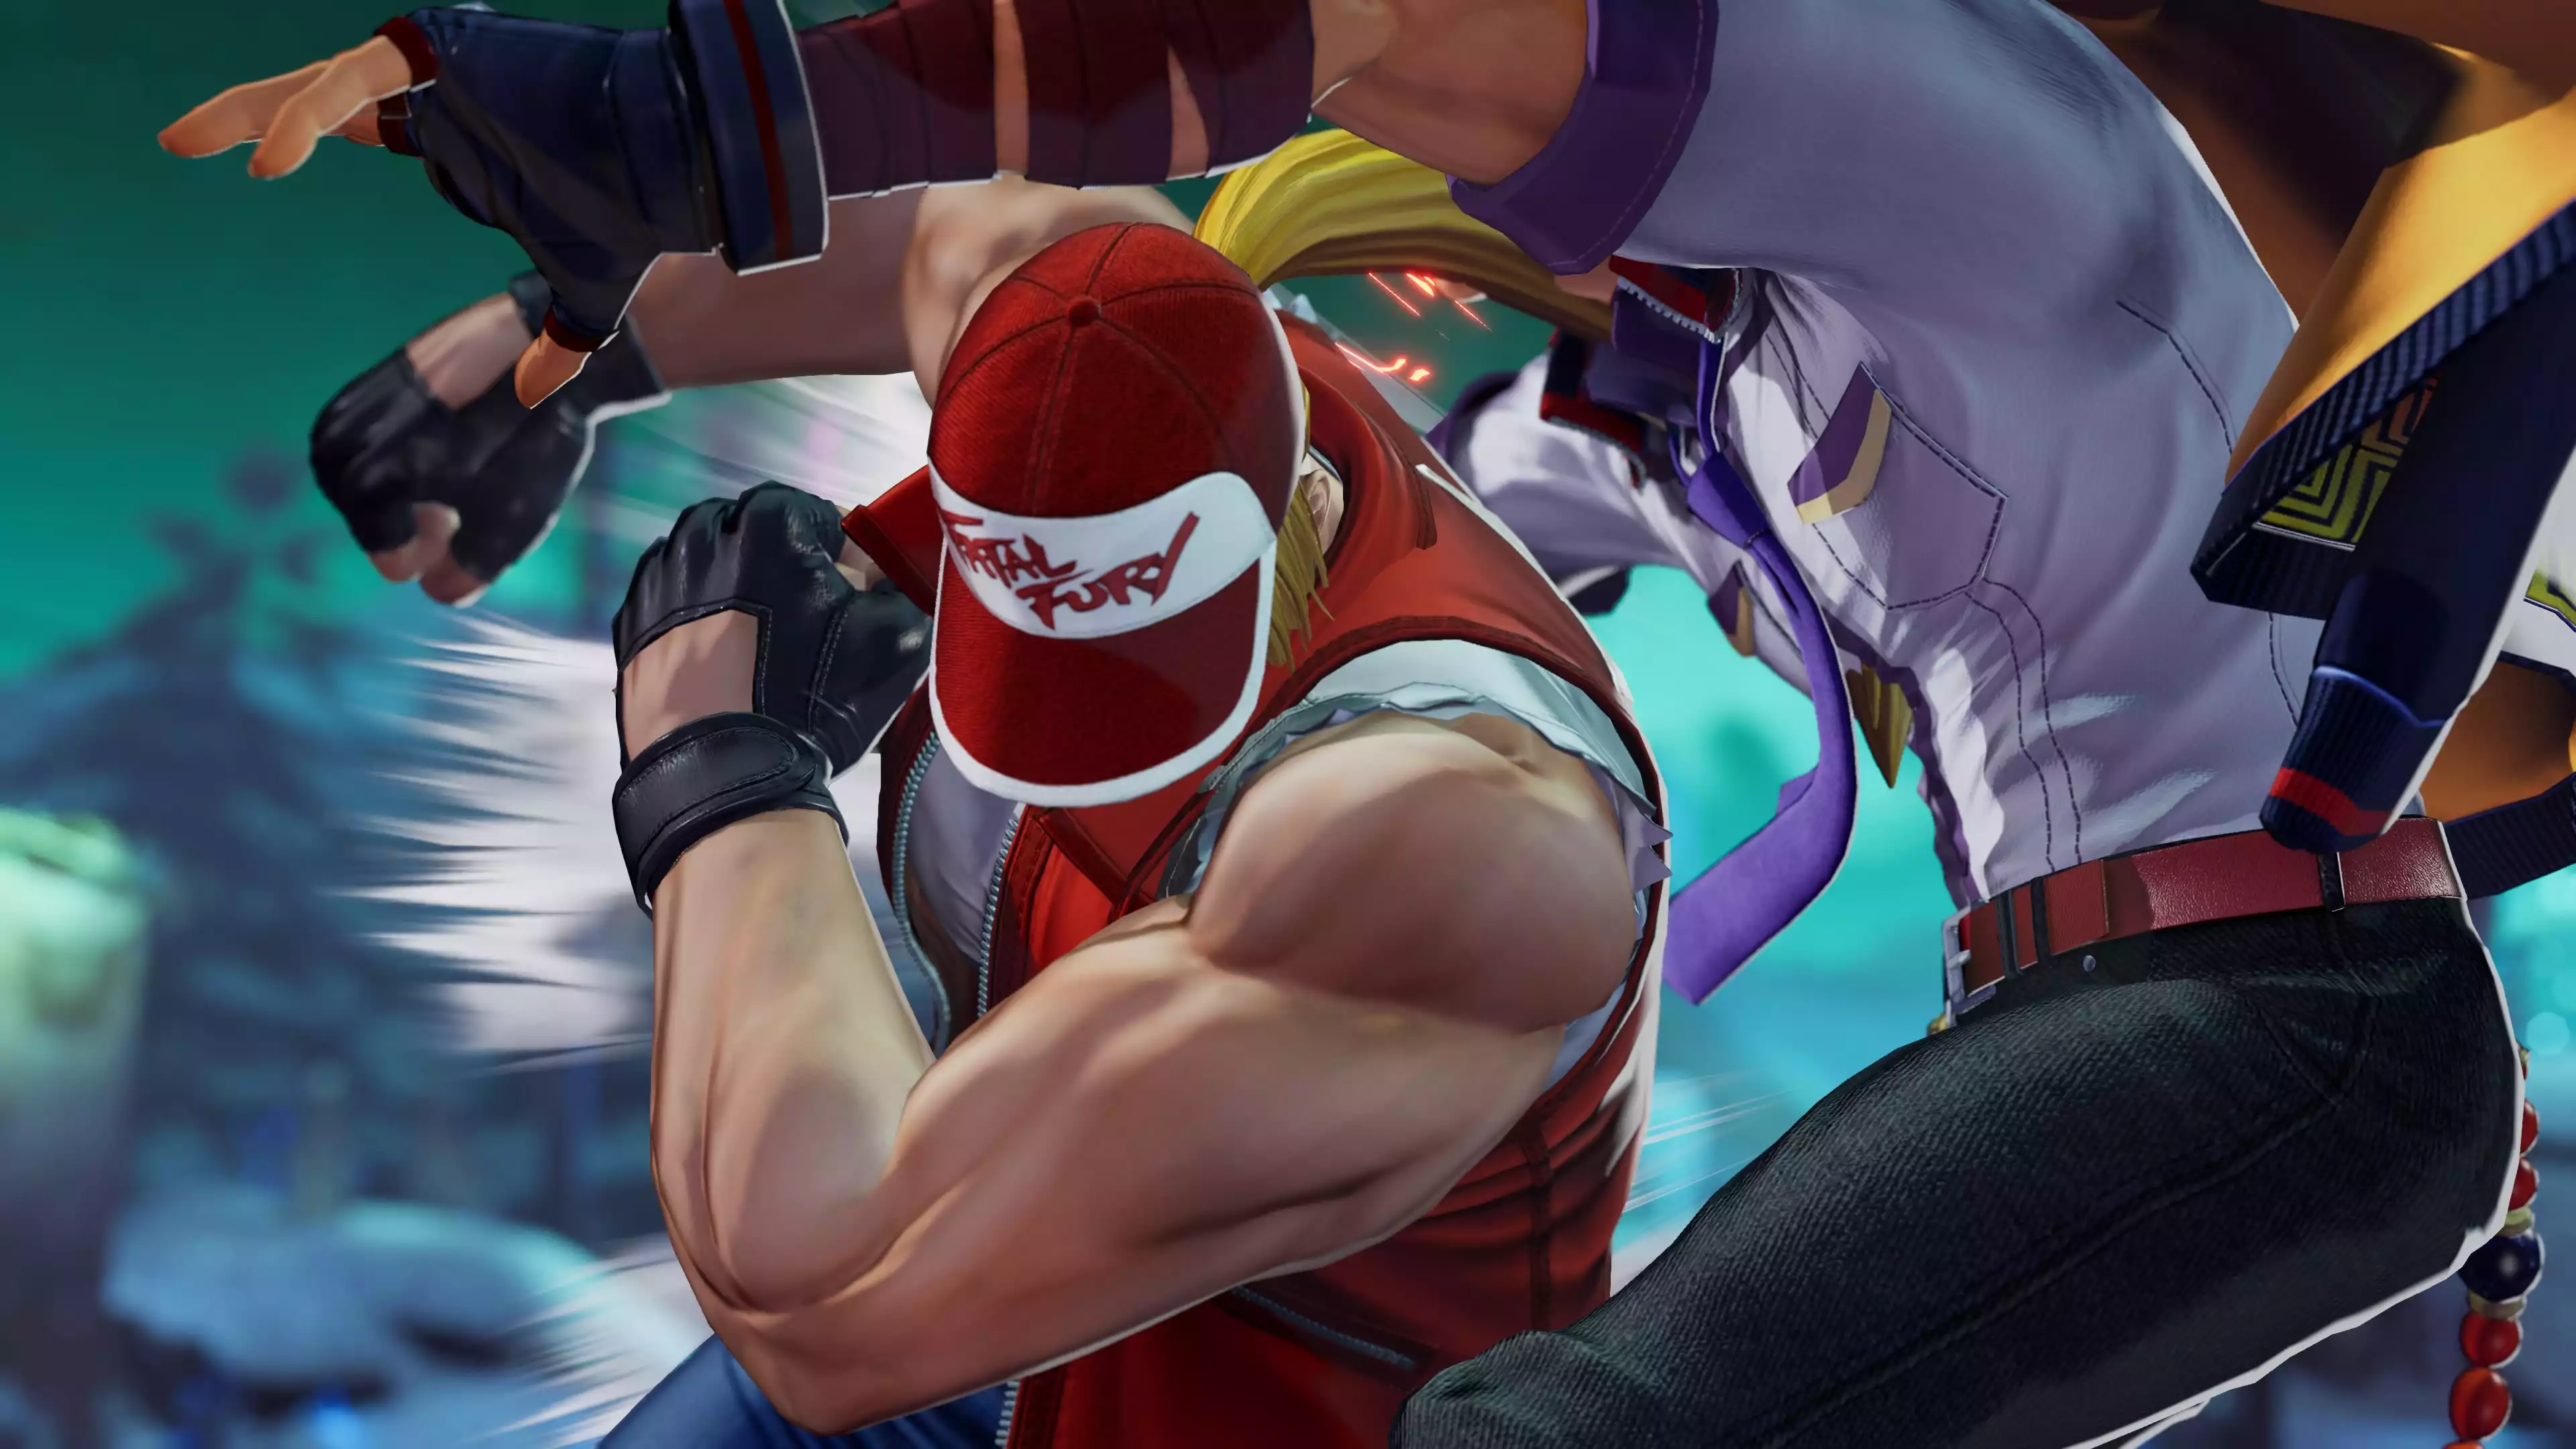 King of Fighters XV Terry Guide: How To Play Terry Bogard